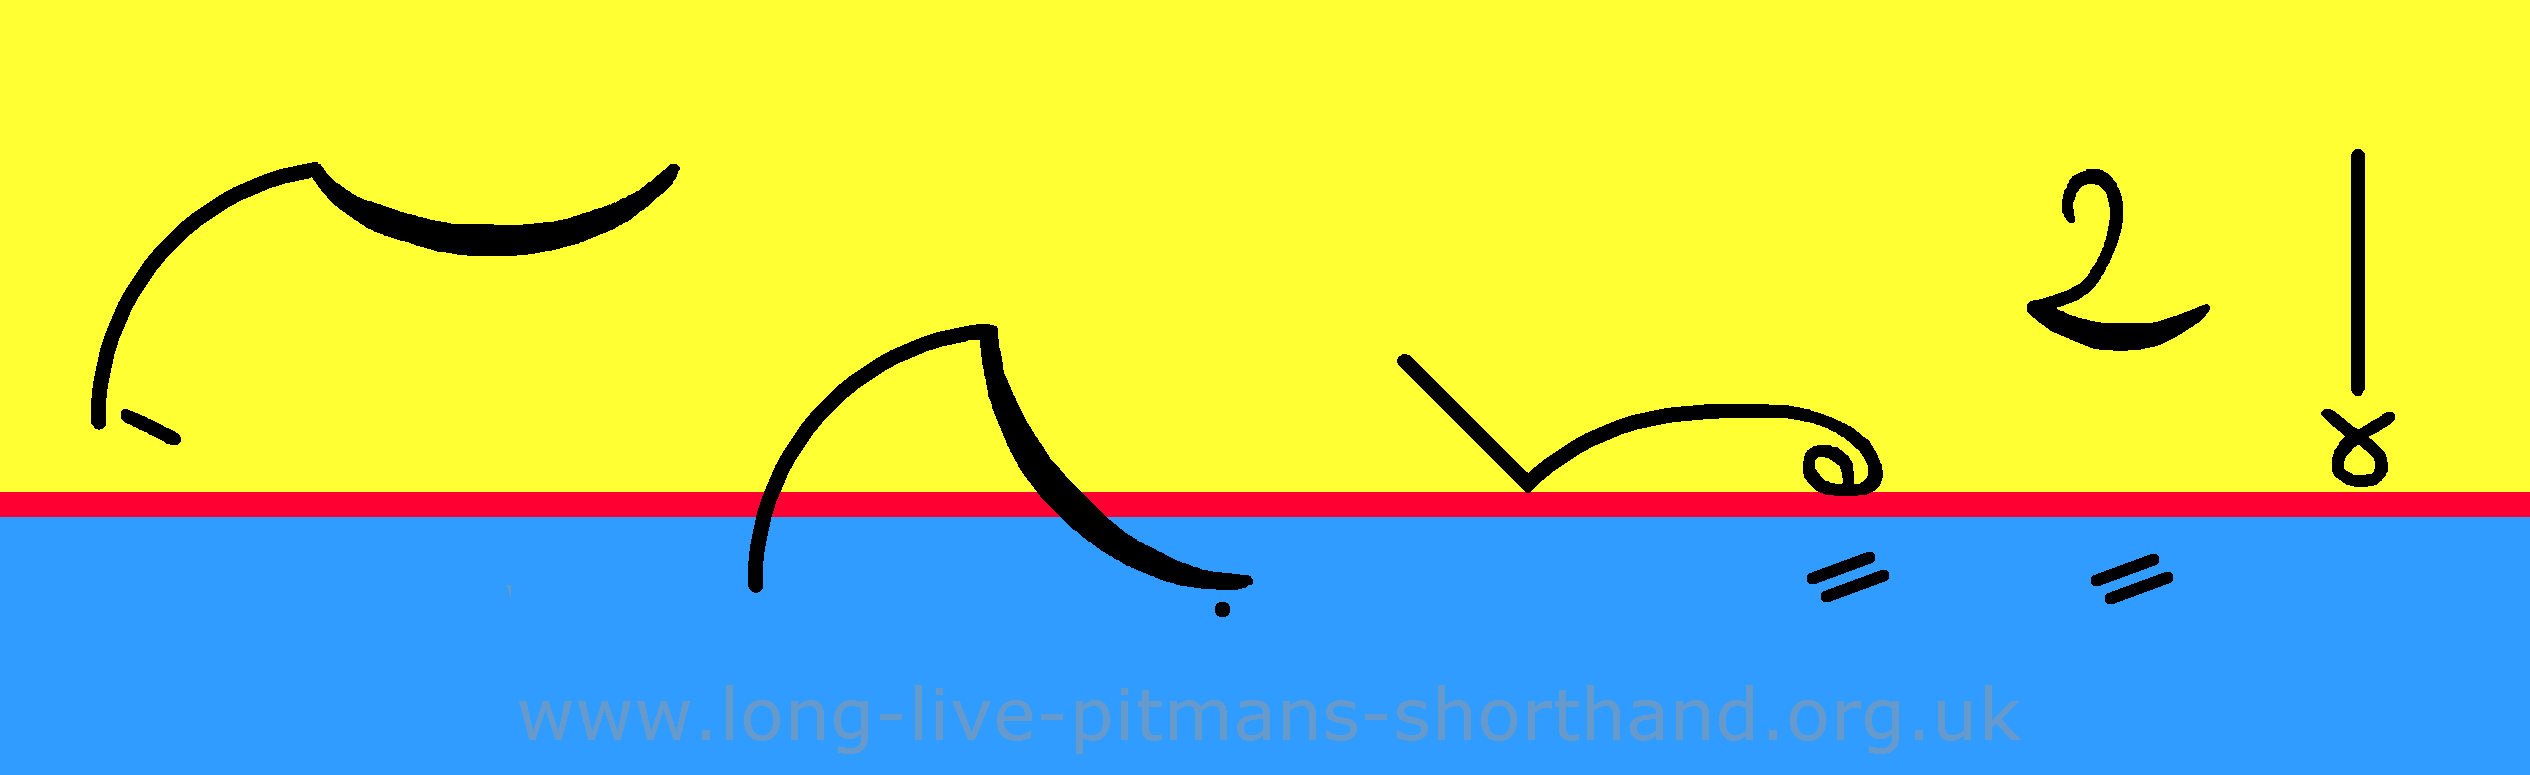 Long Live Pitman's Shorthand! Free resources